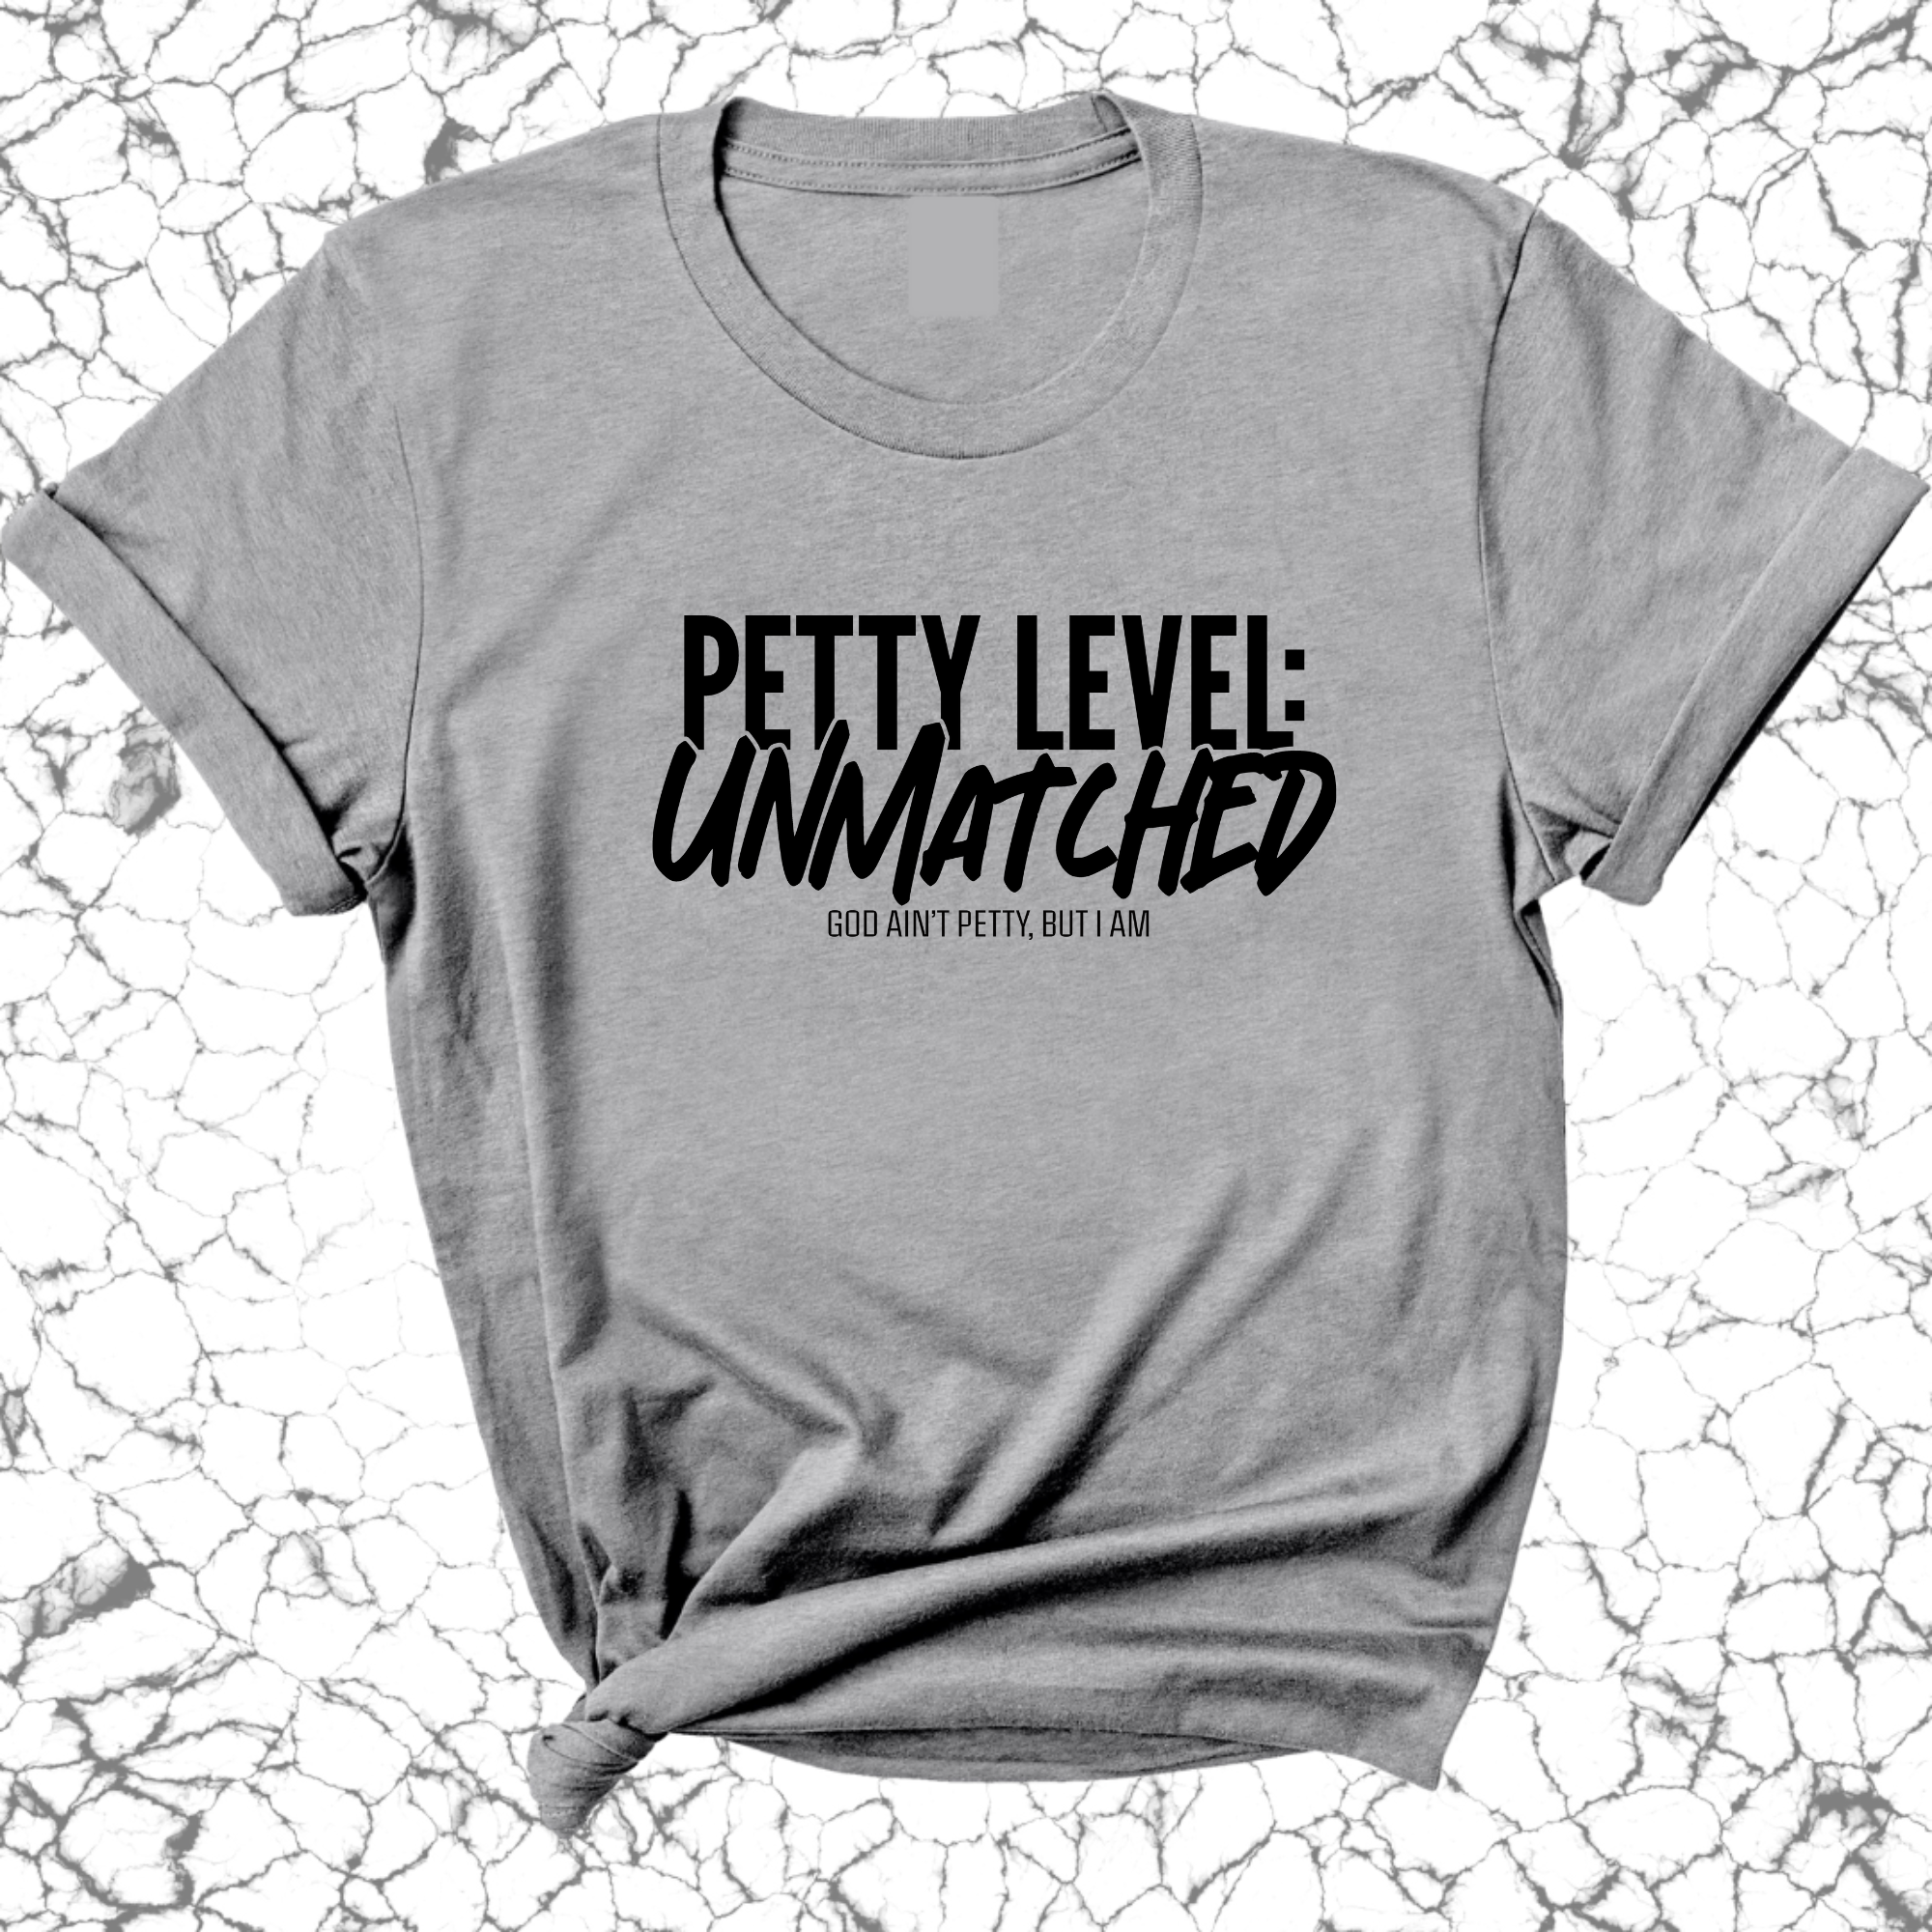 Petty Level: Unmatched Unisex Tee-T-Shirt-The Original God Ain't Petty But I Am